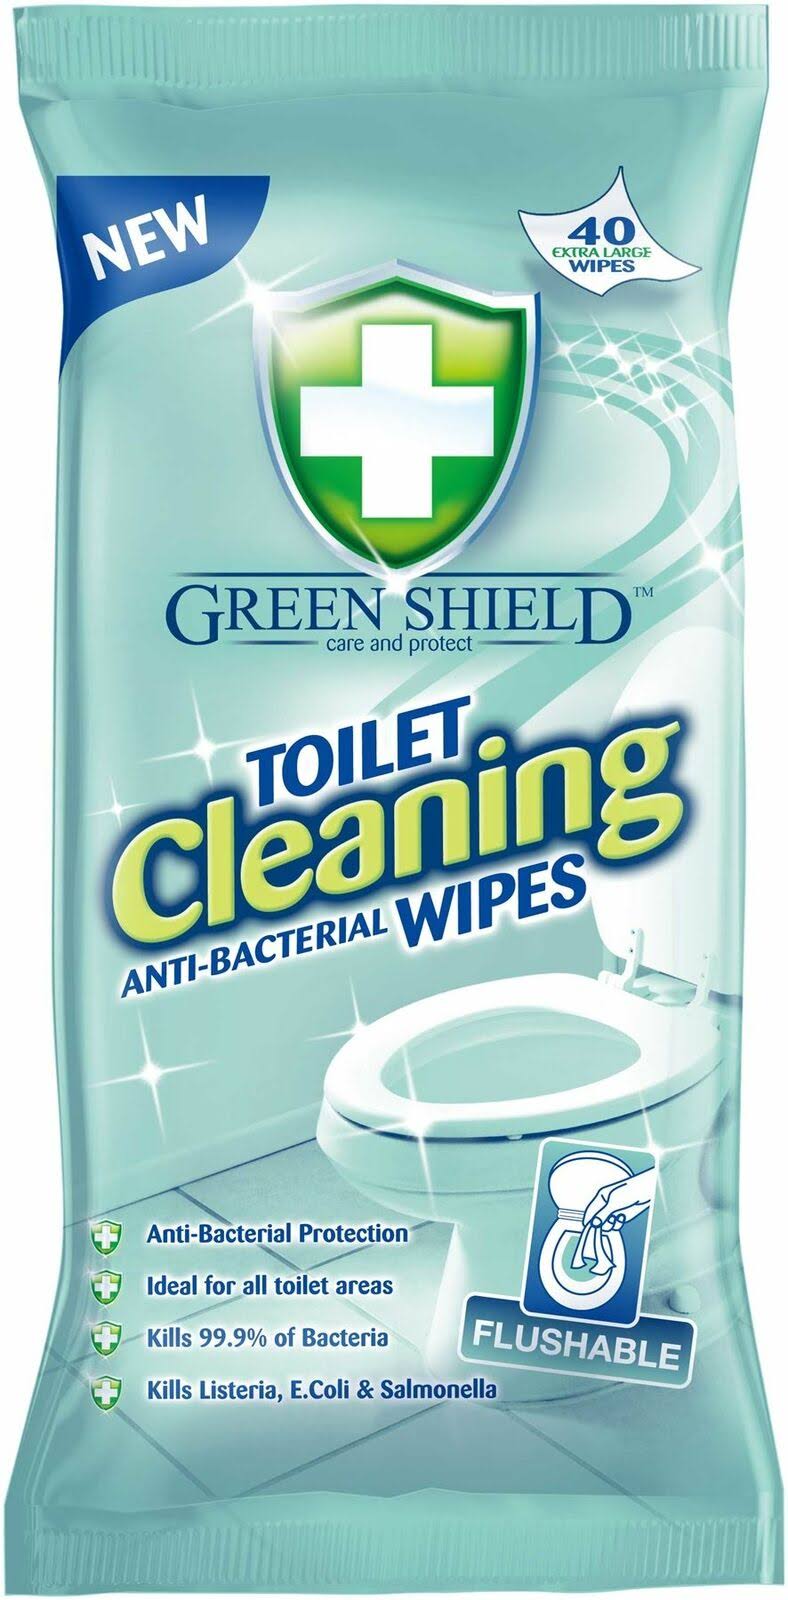 Green Shield Toilet Cleaning ANTI-BACTERIAL Wipes